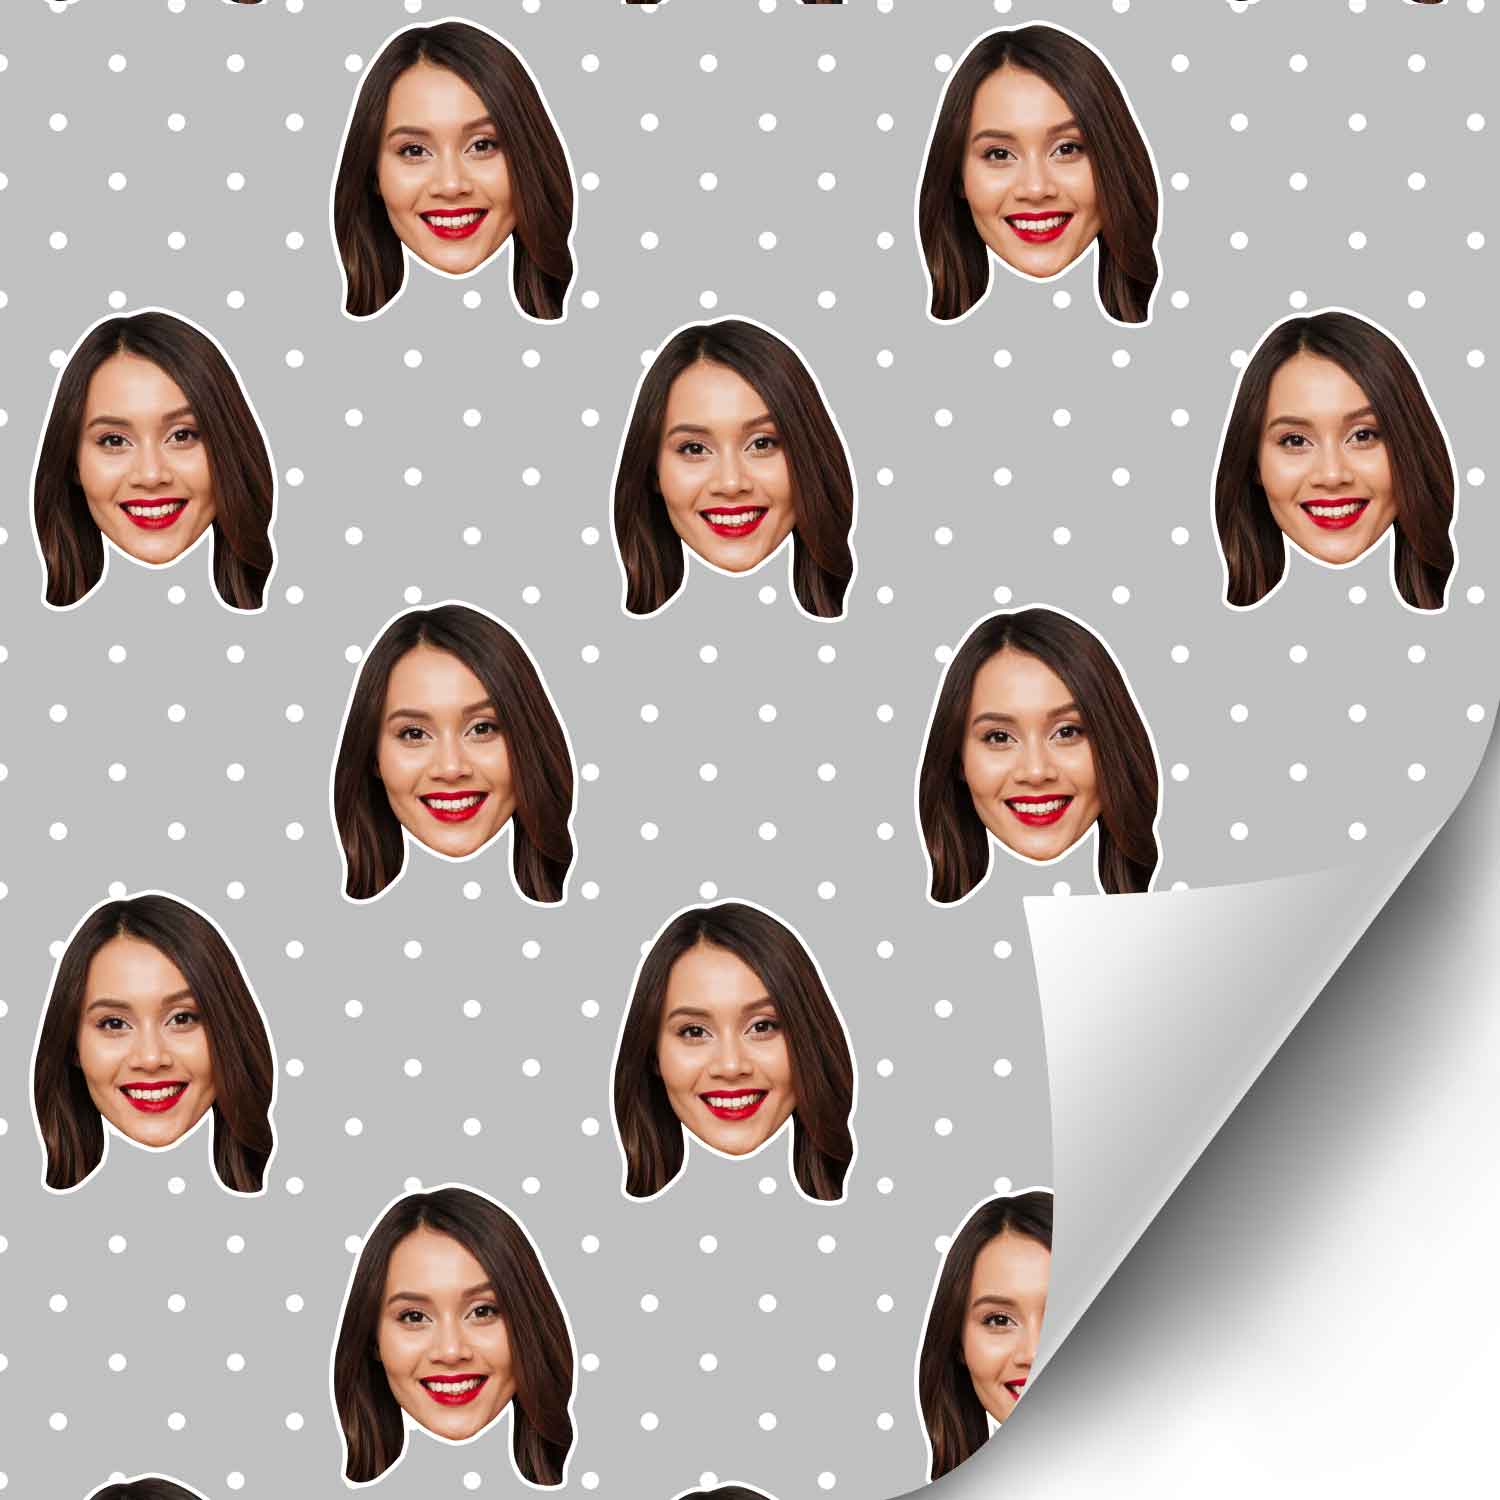 Your Face Polka Dot Wrapping Paper